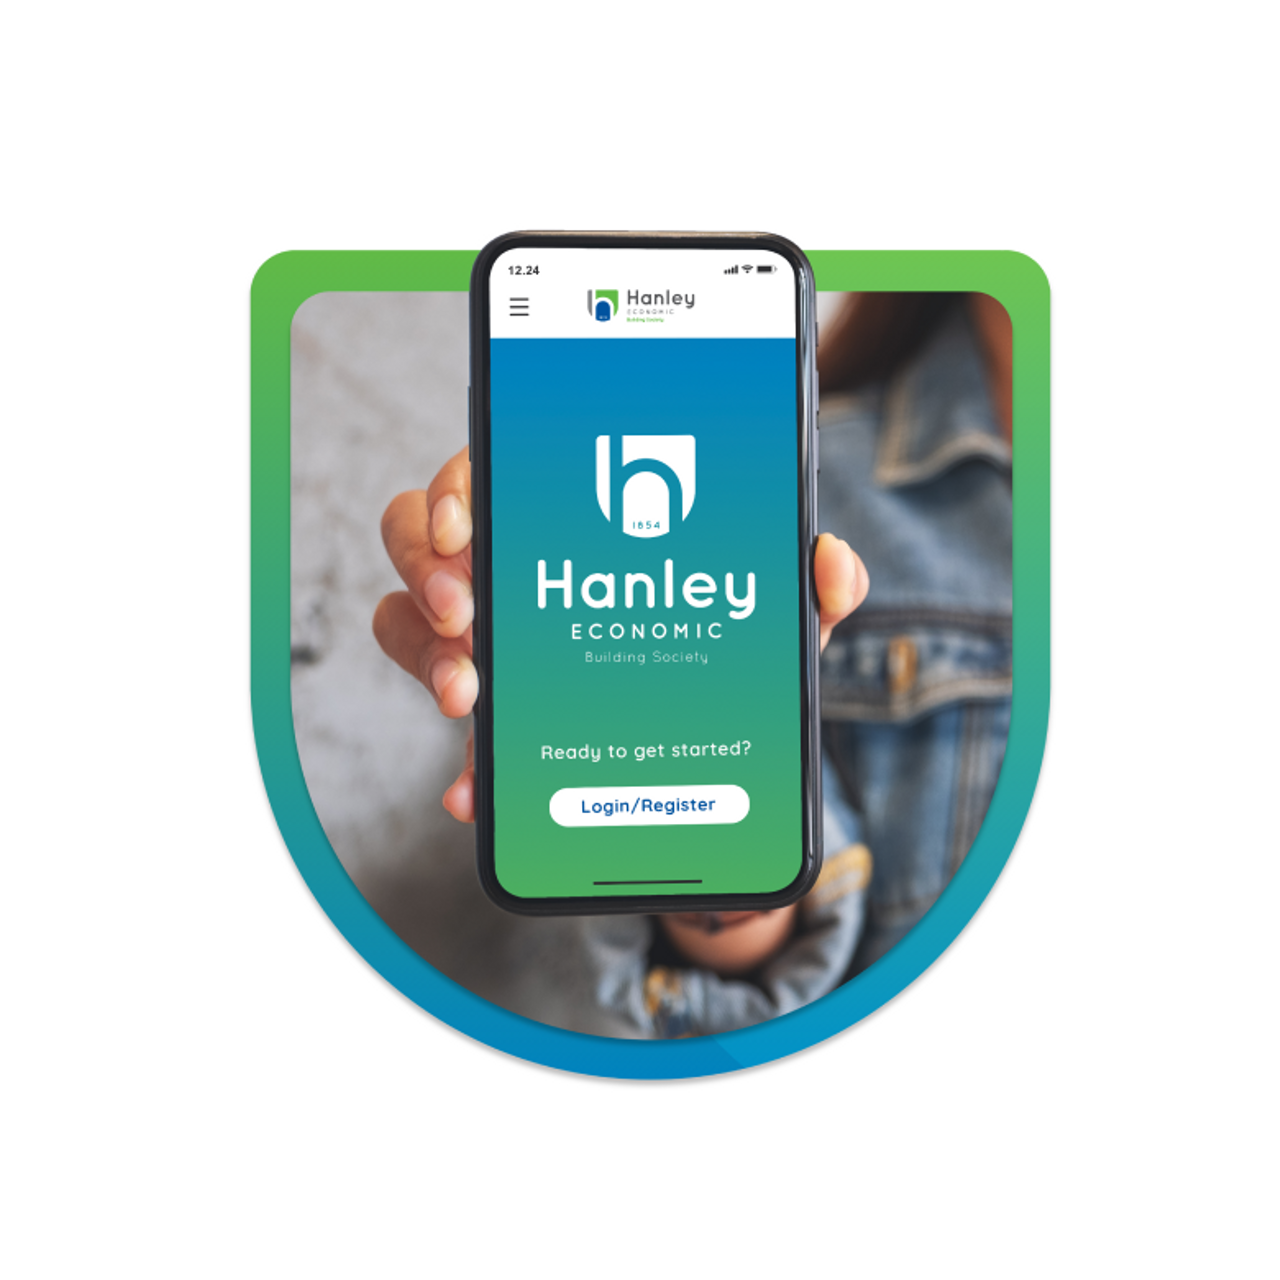 Smartphone displaying Hanley Economic Building Society's app with login prompt, held by hands and enclosed in a green to blue gradient frame.